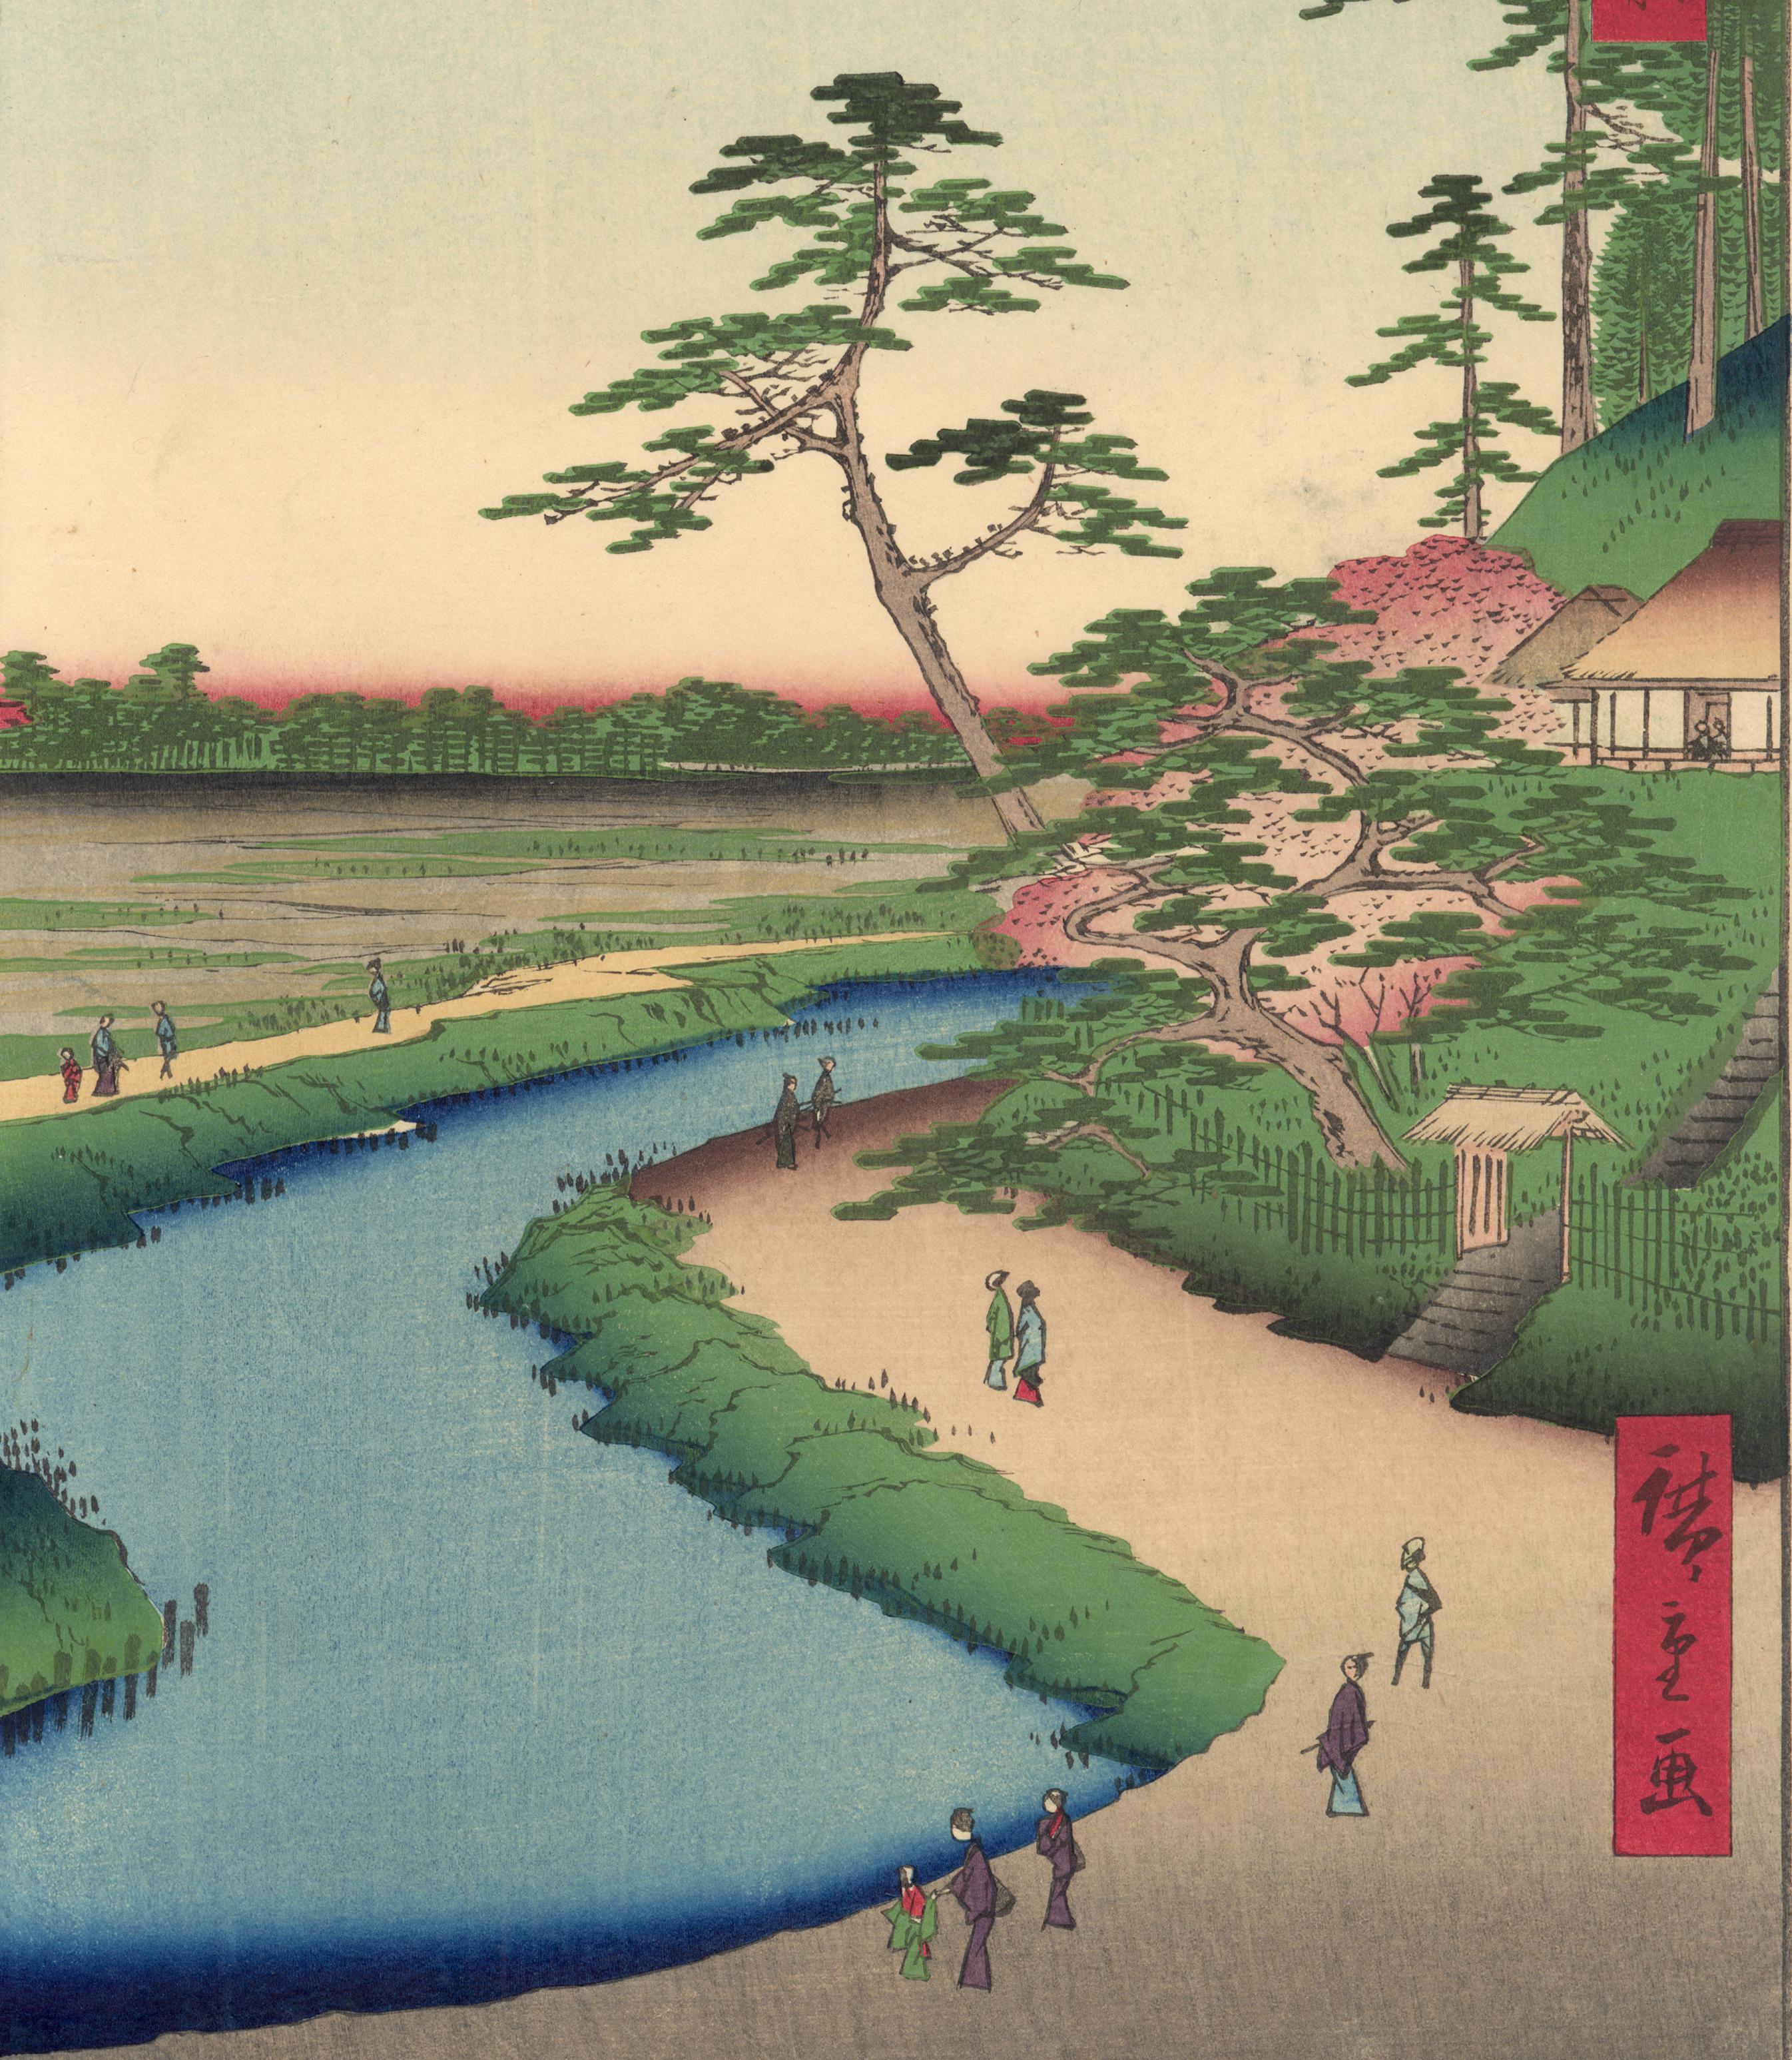 Basho's Hermitage (First, Deluxe Edition) from 100 Views of Edo - Print by Utagawa Hiroshige (Ando Hiroshige)